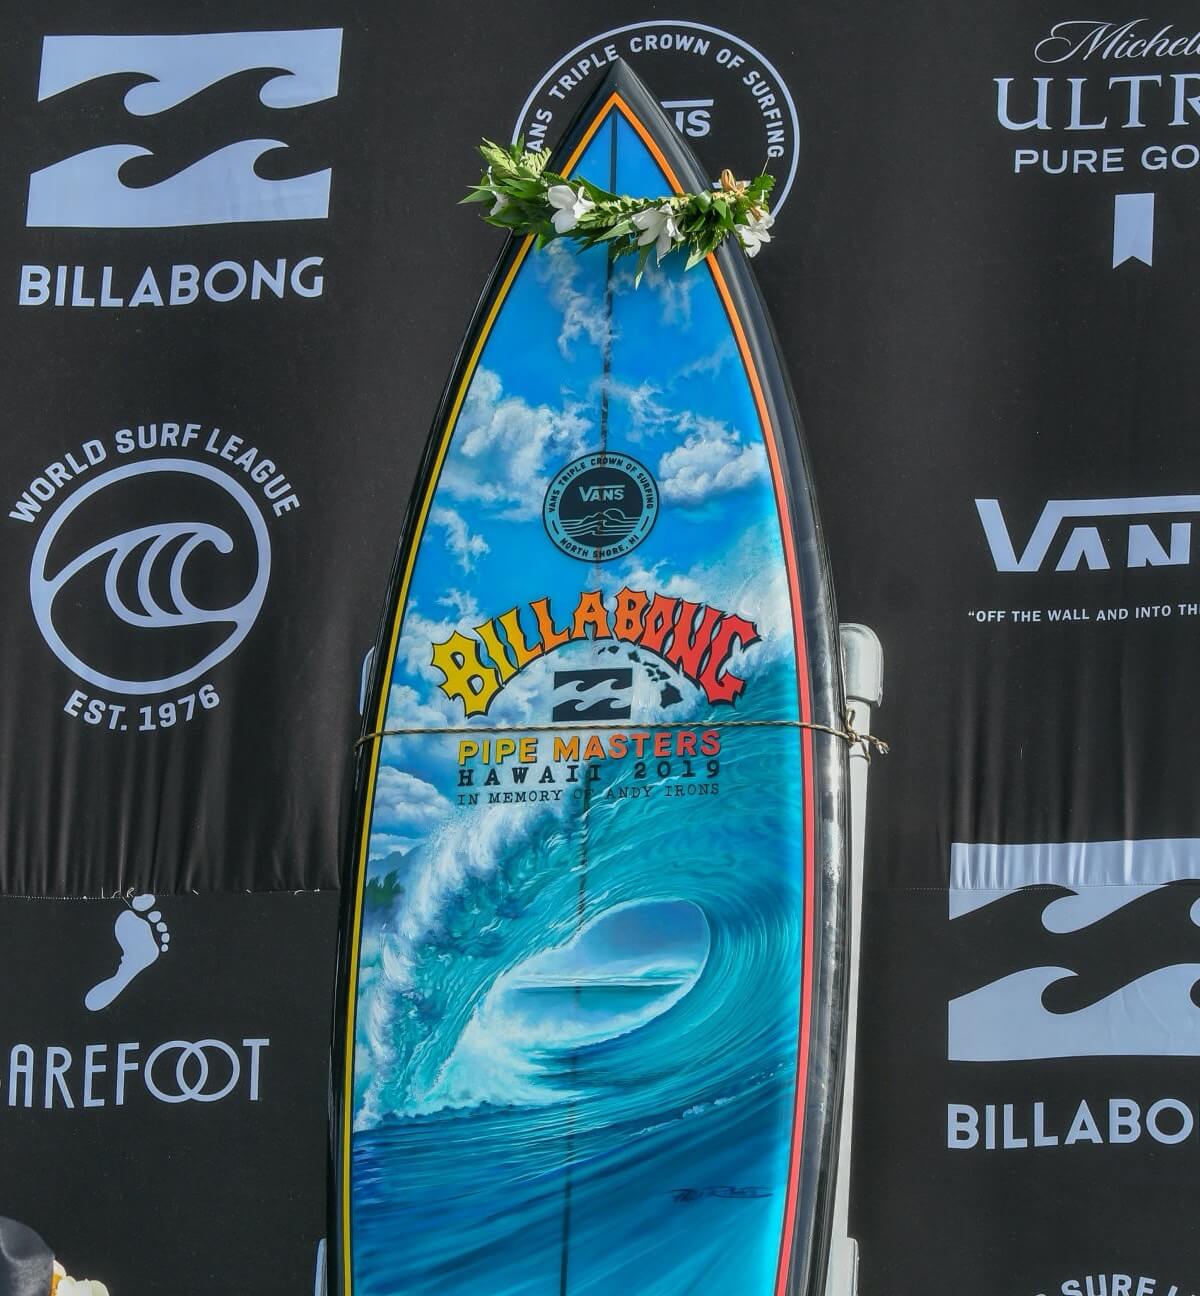 2019 Pipe Masters trophy surfboard by Phil Roberts and Gerry Lopez